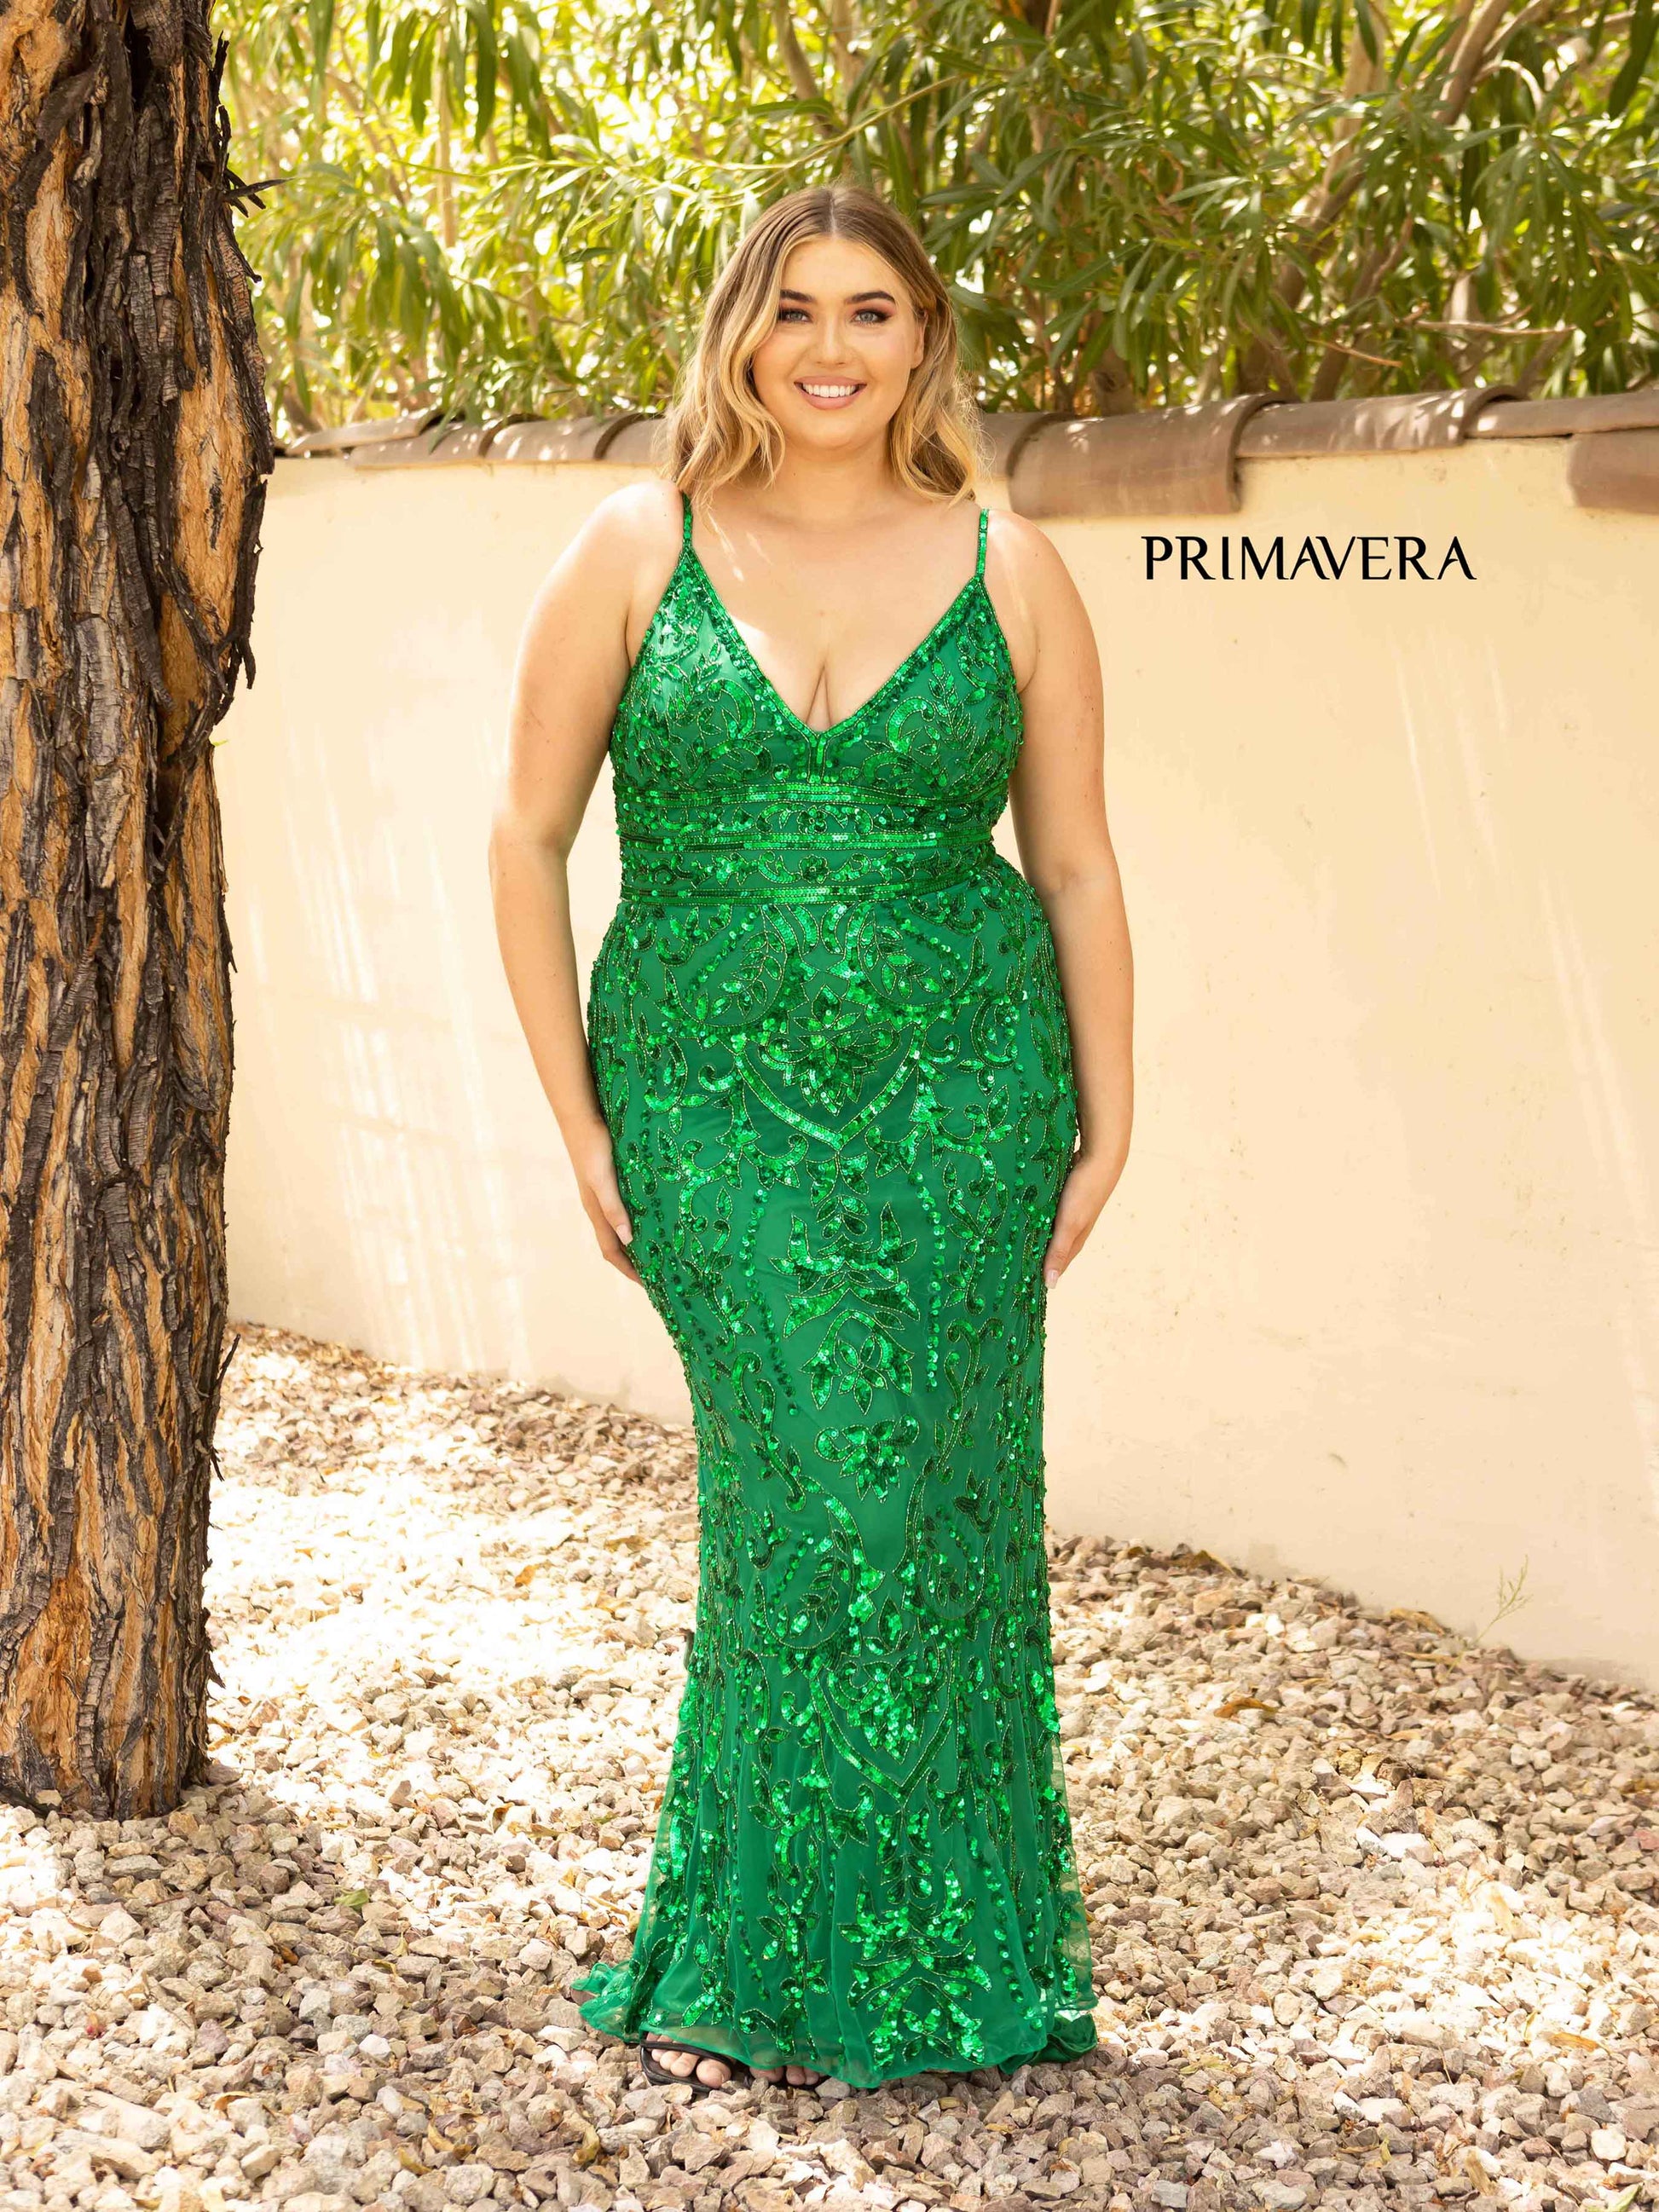 Primavera Couture 14001 Curvy Prom, Pageant and Formal Dress.  This is an all sequins plus gown with a v neckline with rows of horizontal beading at the waistline to define the waist and show your curves. emerald green